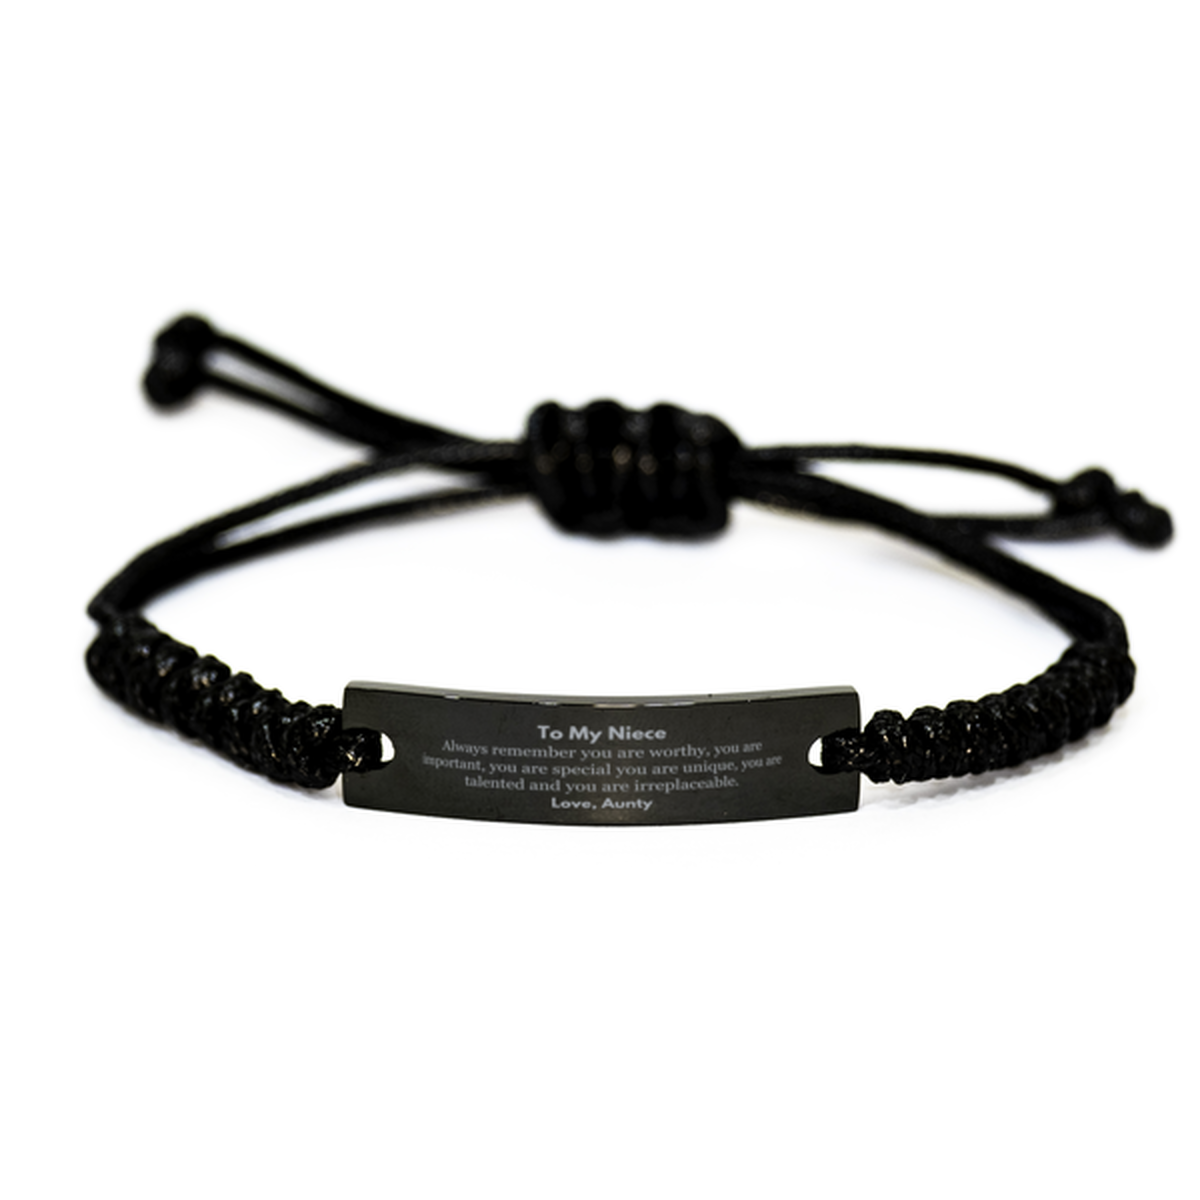 Niece Birthday Gifts from Aunty, Inspirational Black Rope Bracelet for Niece Christmas Graduation Gifts for Niece Always remember you are worthy, you are important. Love, Aunty